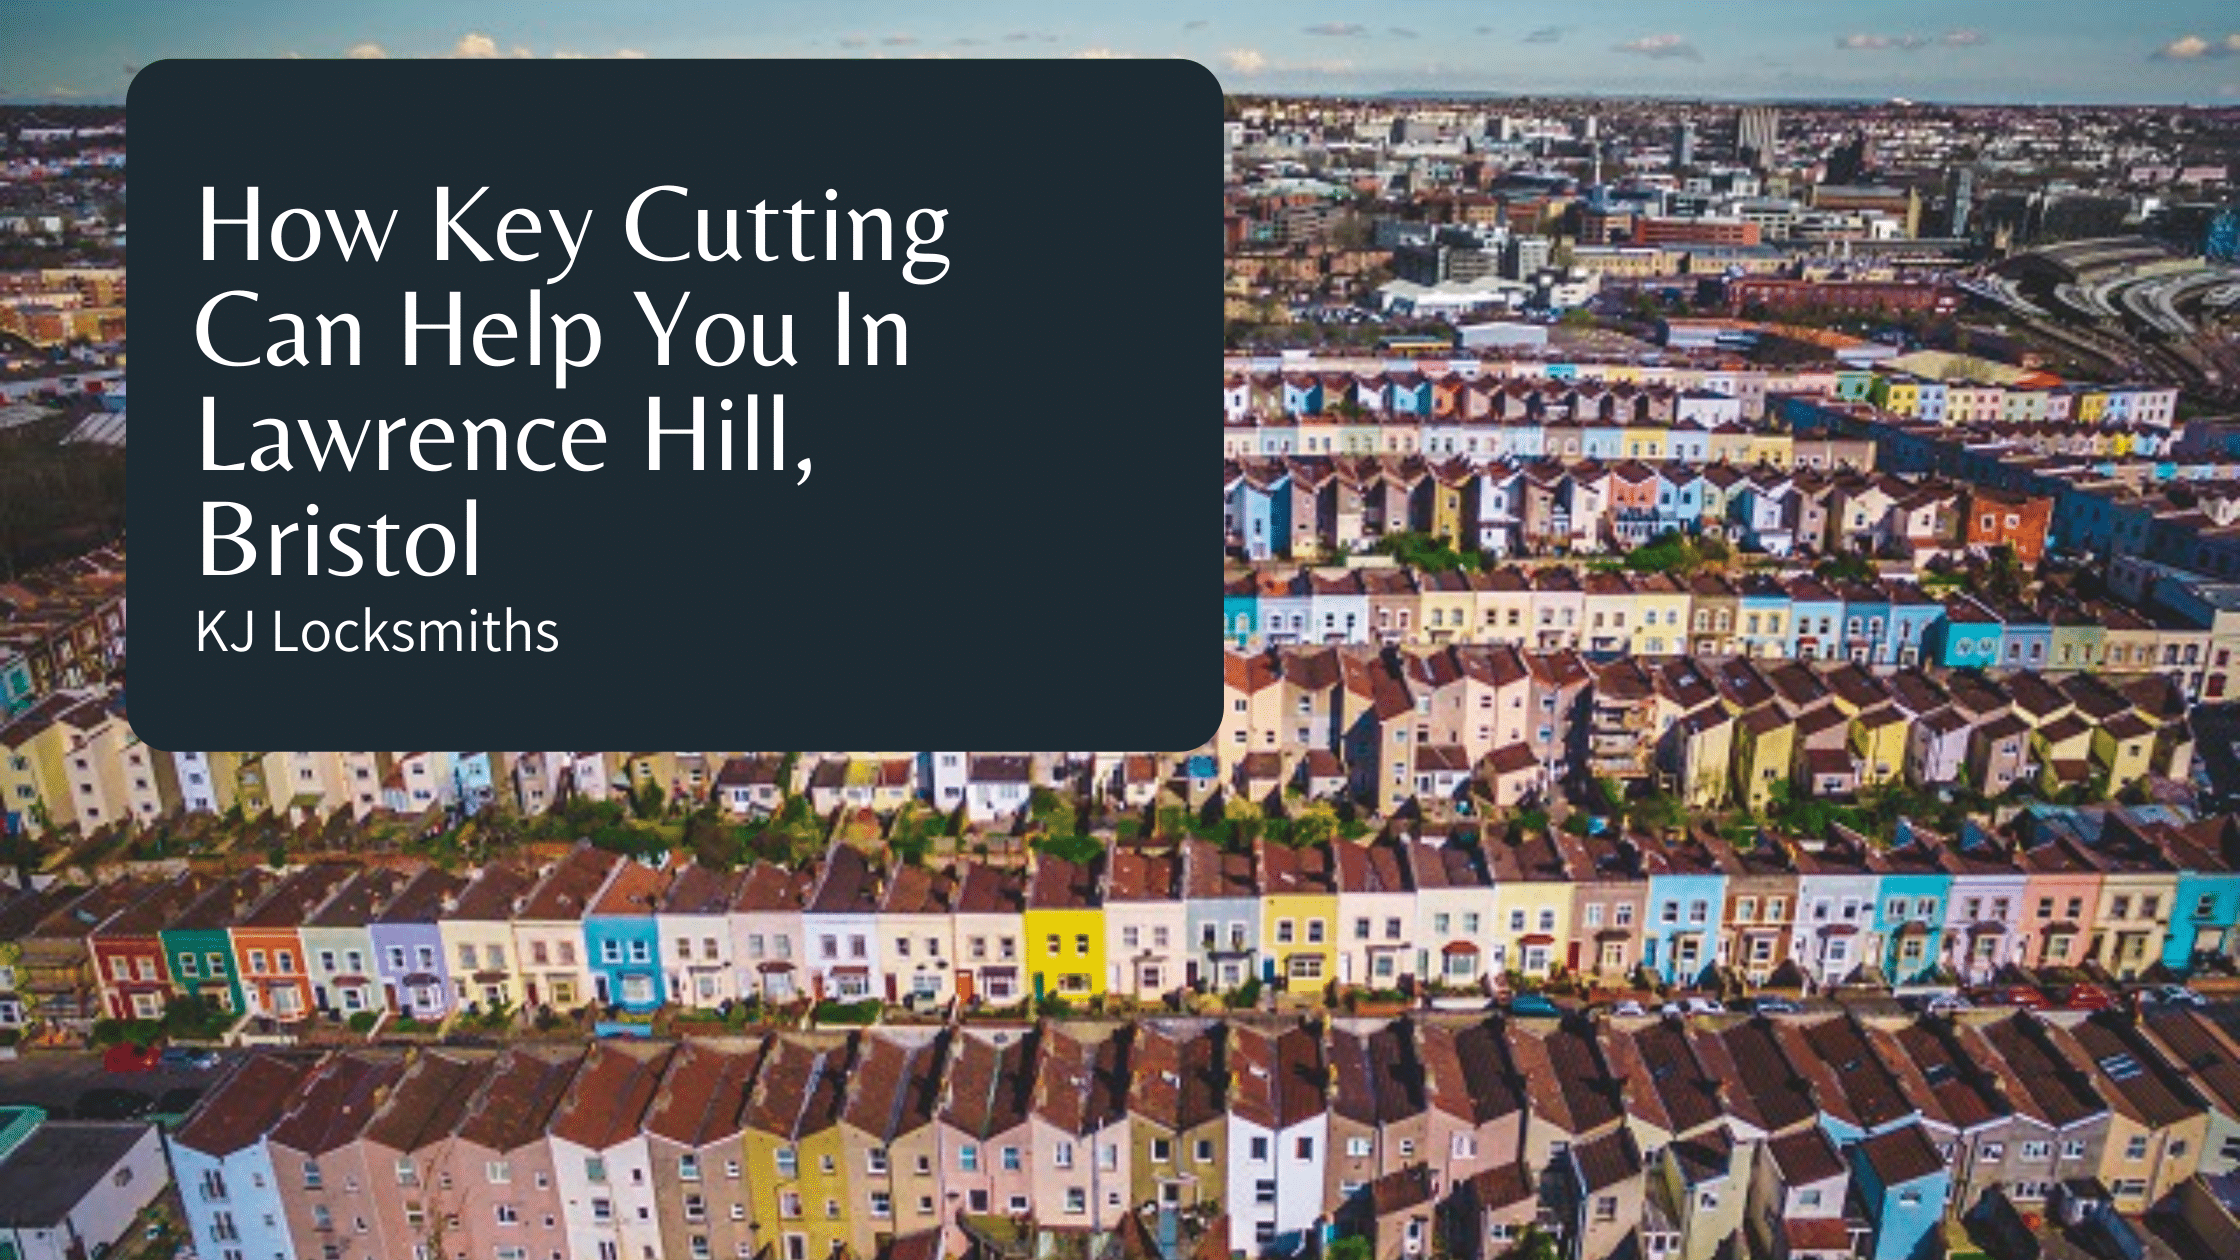 How Key Cutting Can Help You In Lawrence Hill, Bristol